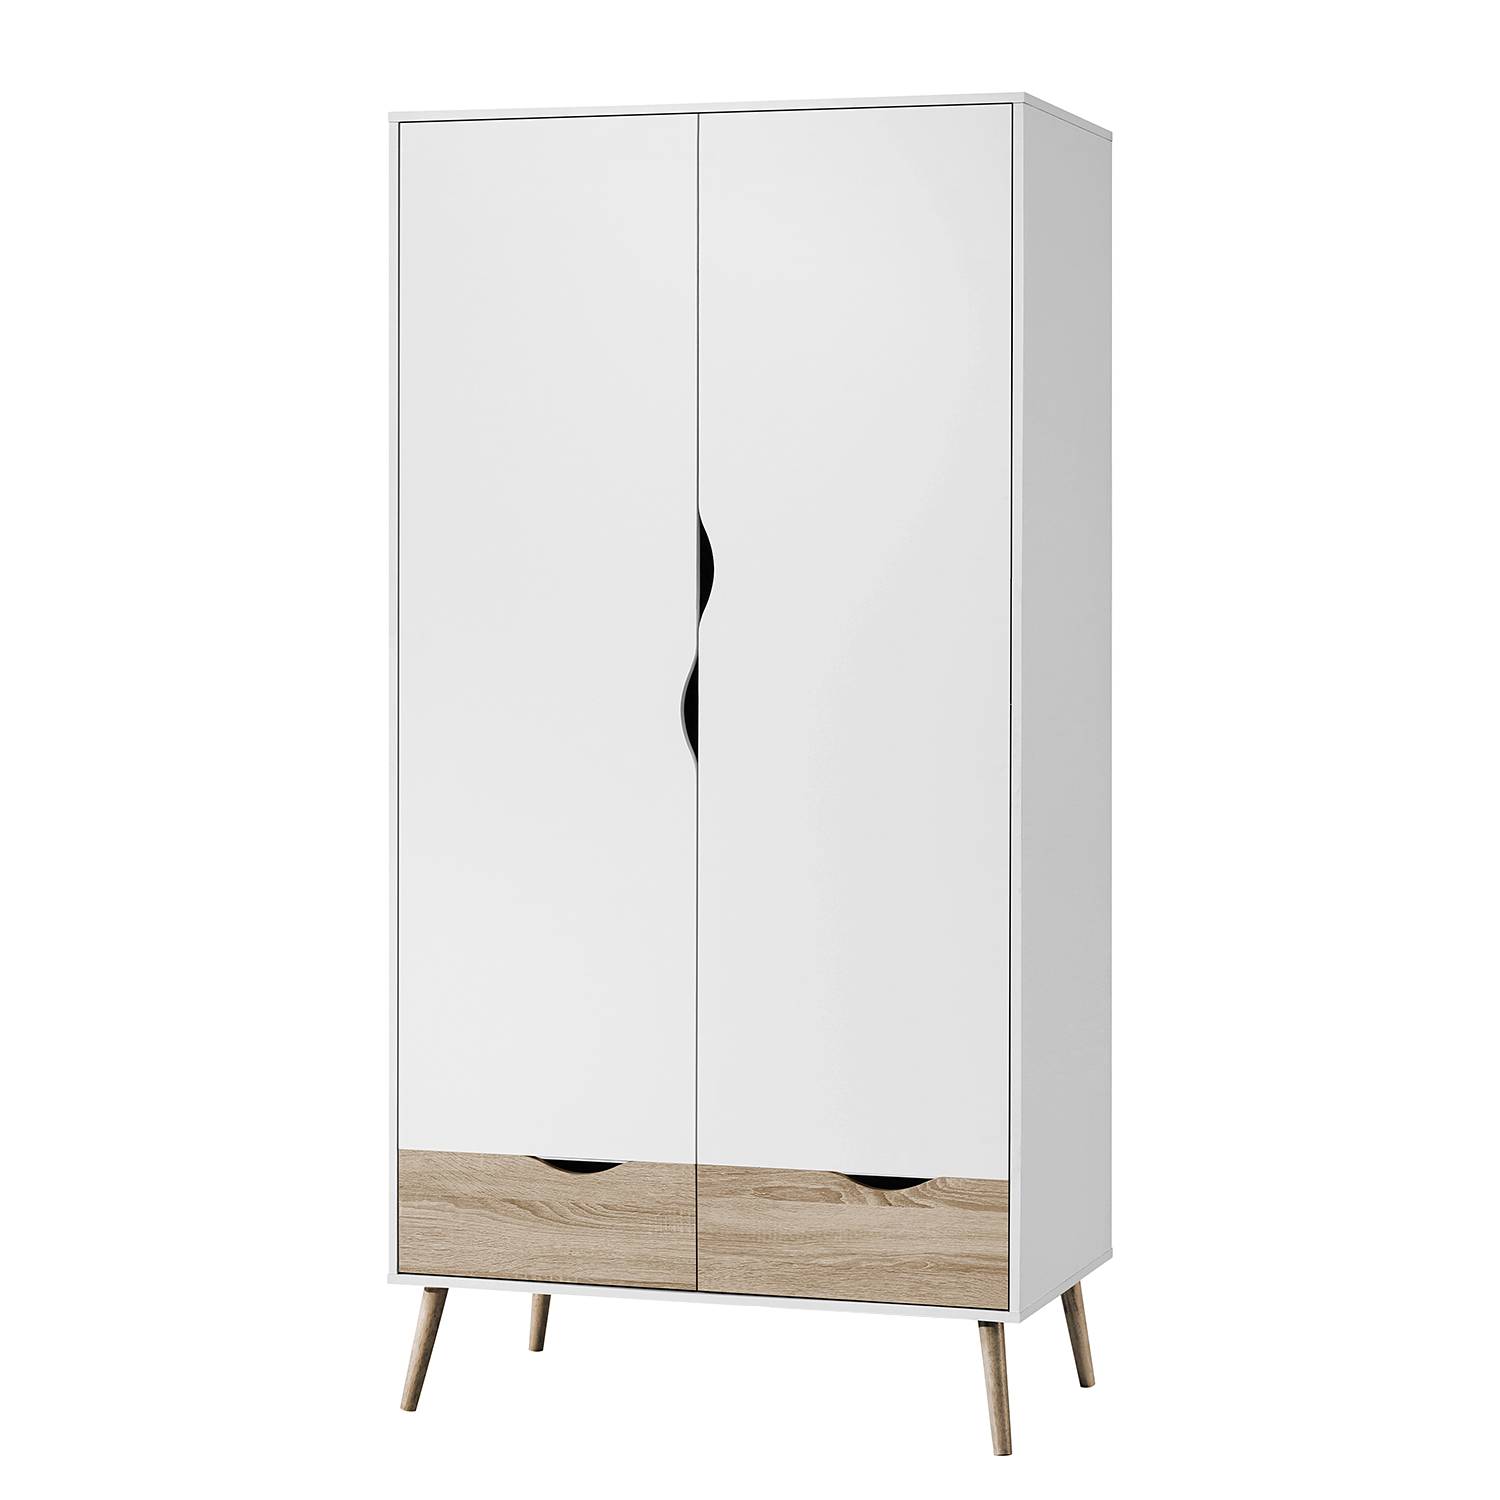 Image of Armoire Sunndal 000000001000123673